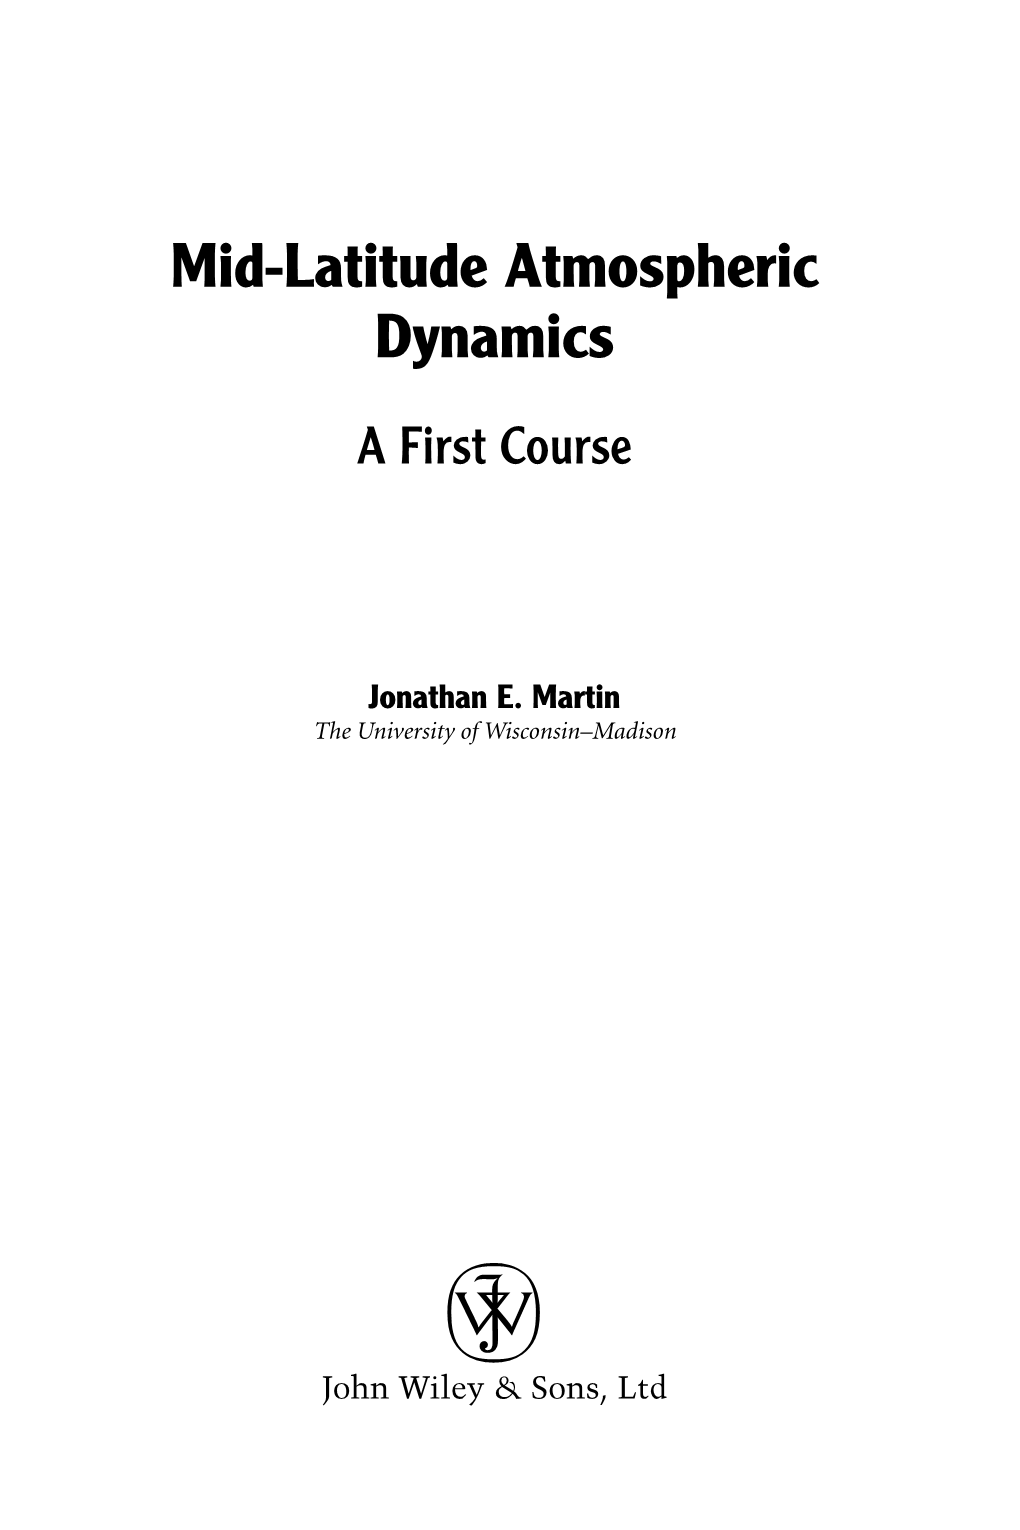 Mid-Latitude Atmospheric Dynamics: a First Course